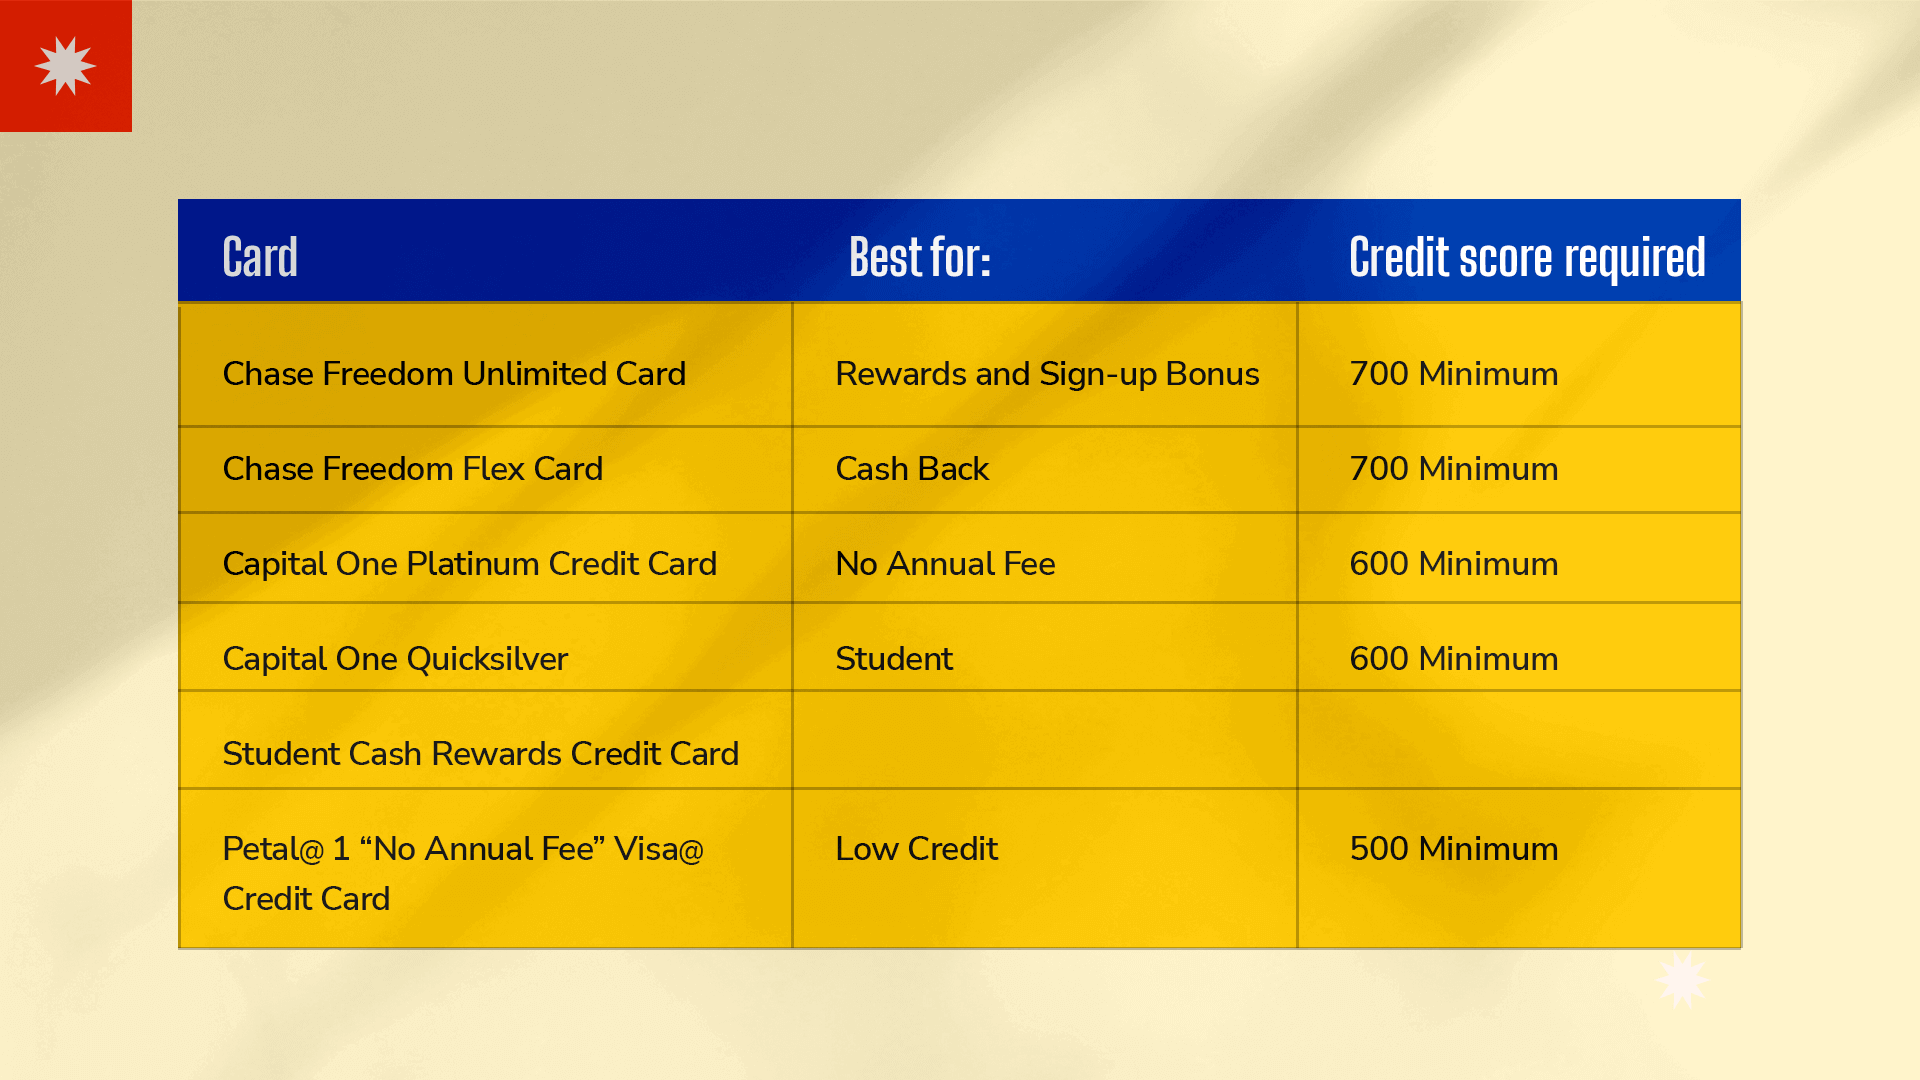 Comparison of the best credit cards for young adults